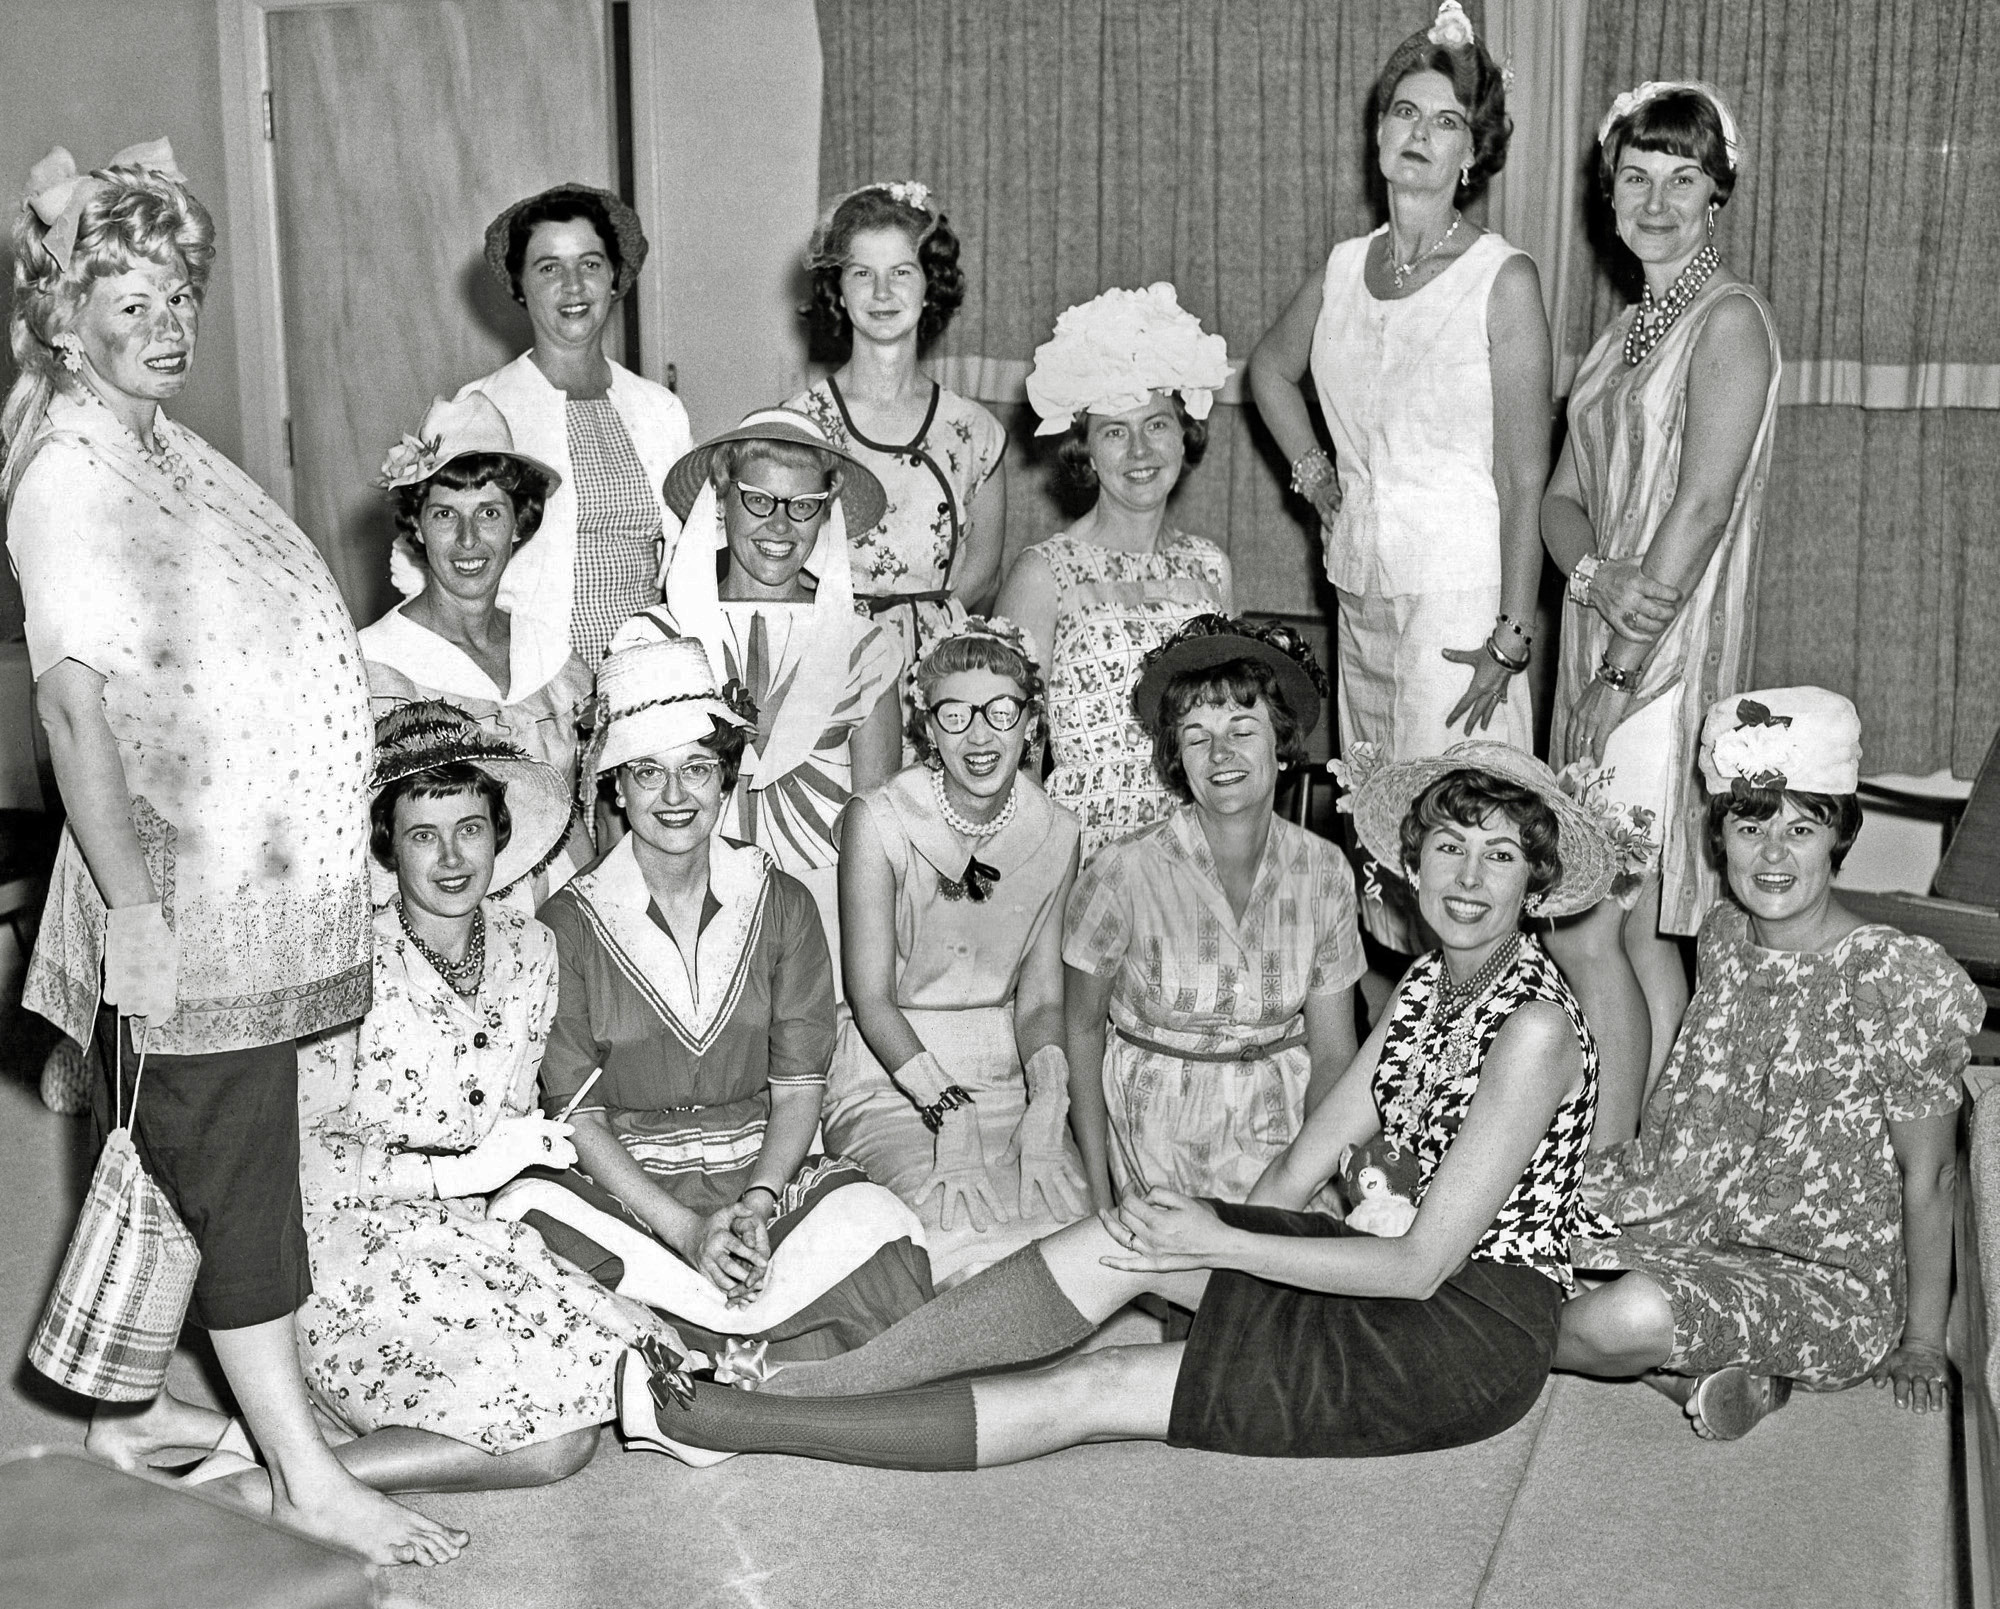 Mad Hat party get together by the ladies of the Sierra Vista, Fort Huachuca, Arizona Beta Phi Sorority. A 1965 photo by Jay's Photo, Sierra Vista, Arizona. View full size.